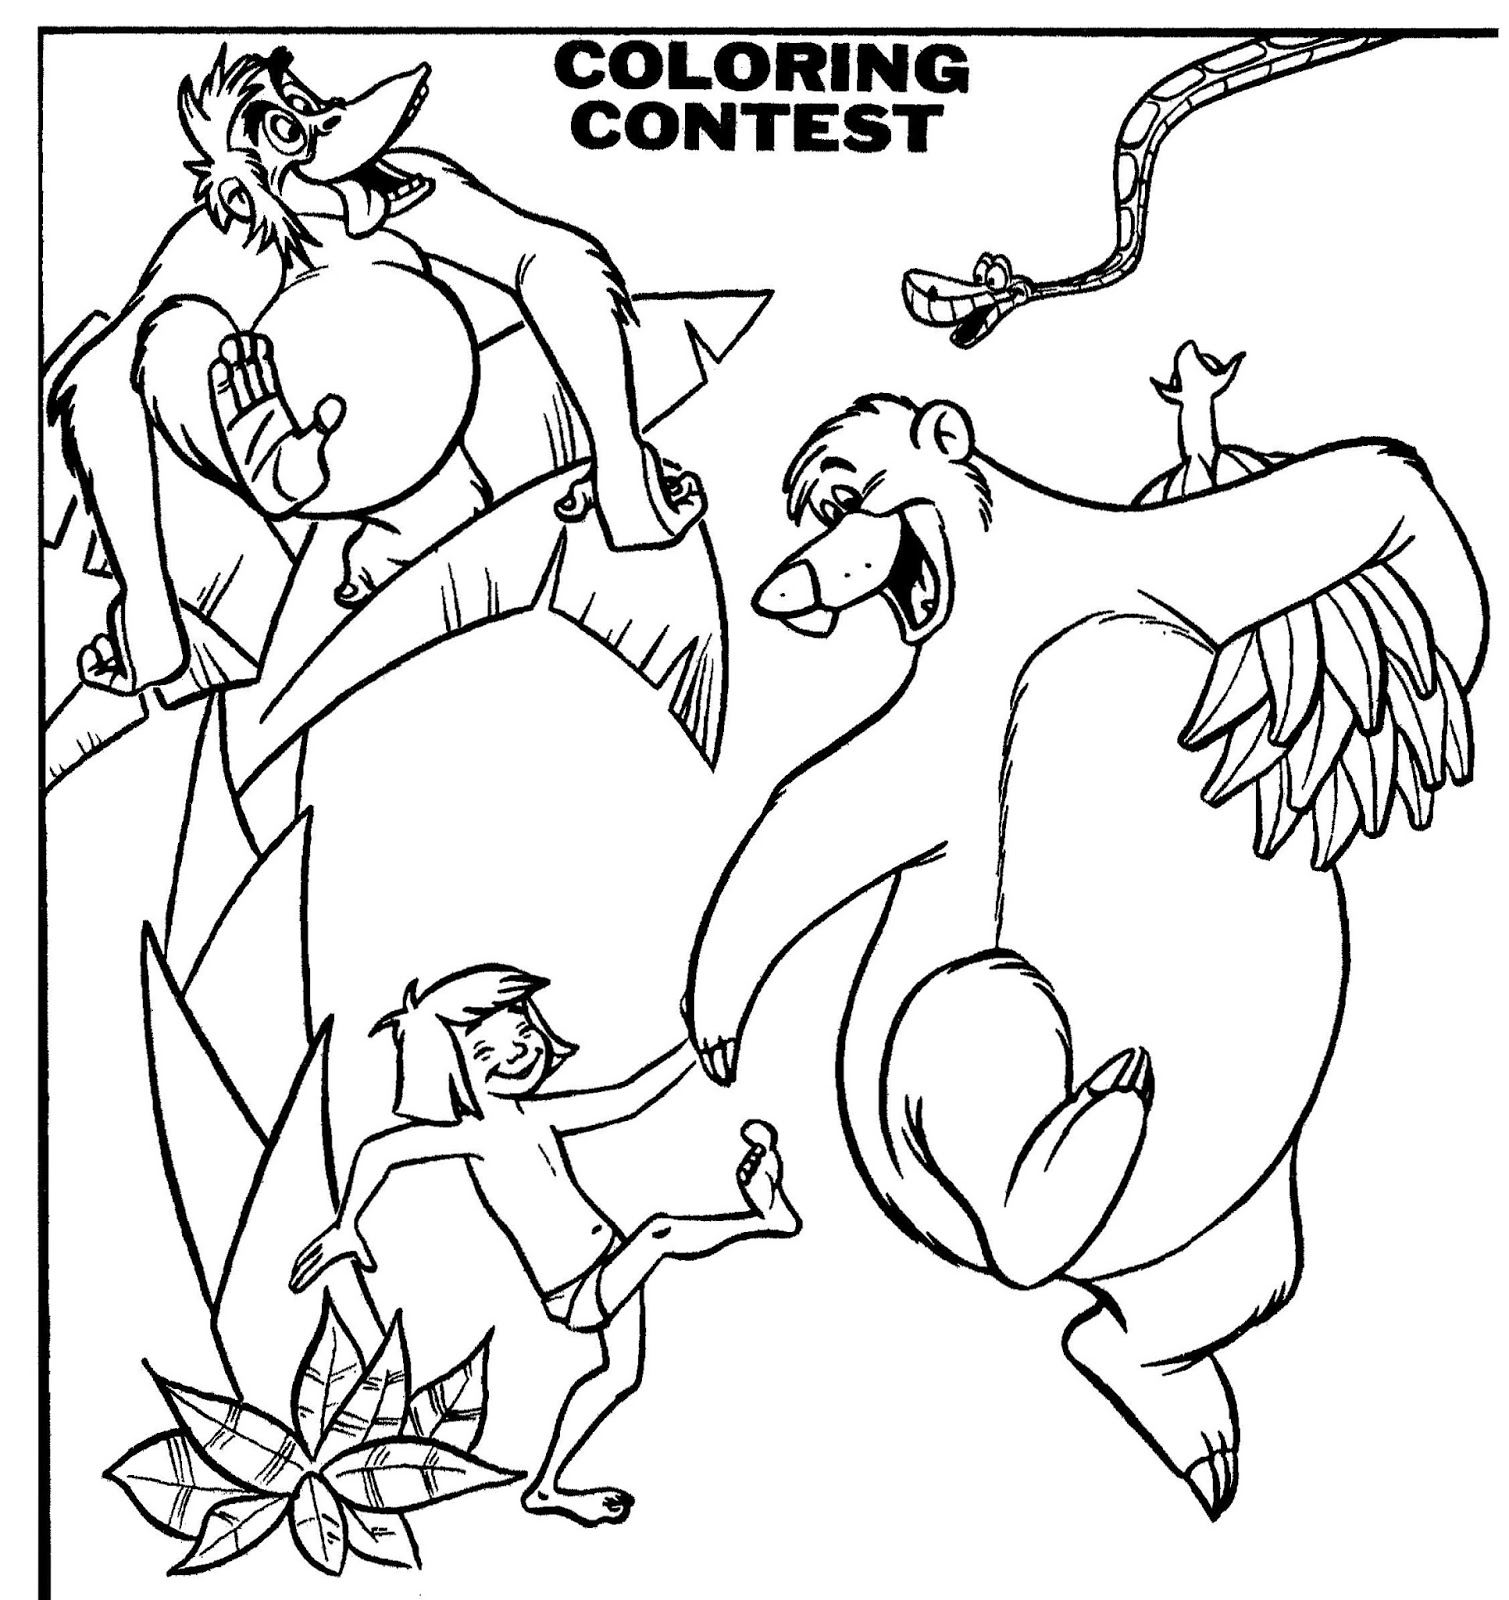 mostly-paper-dolls-too-the-jungle-book-coloring-contest